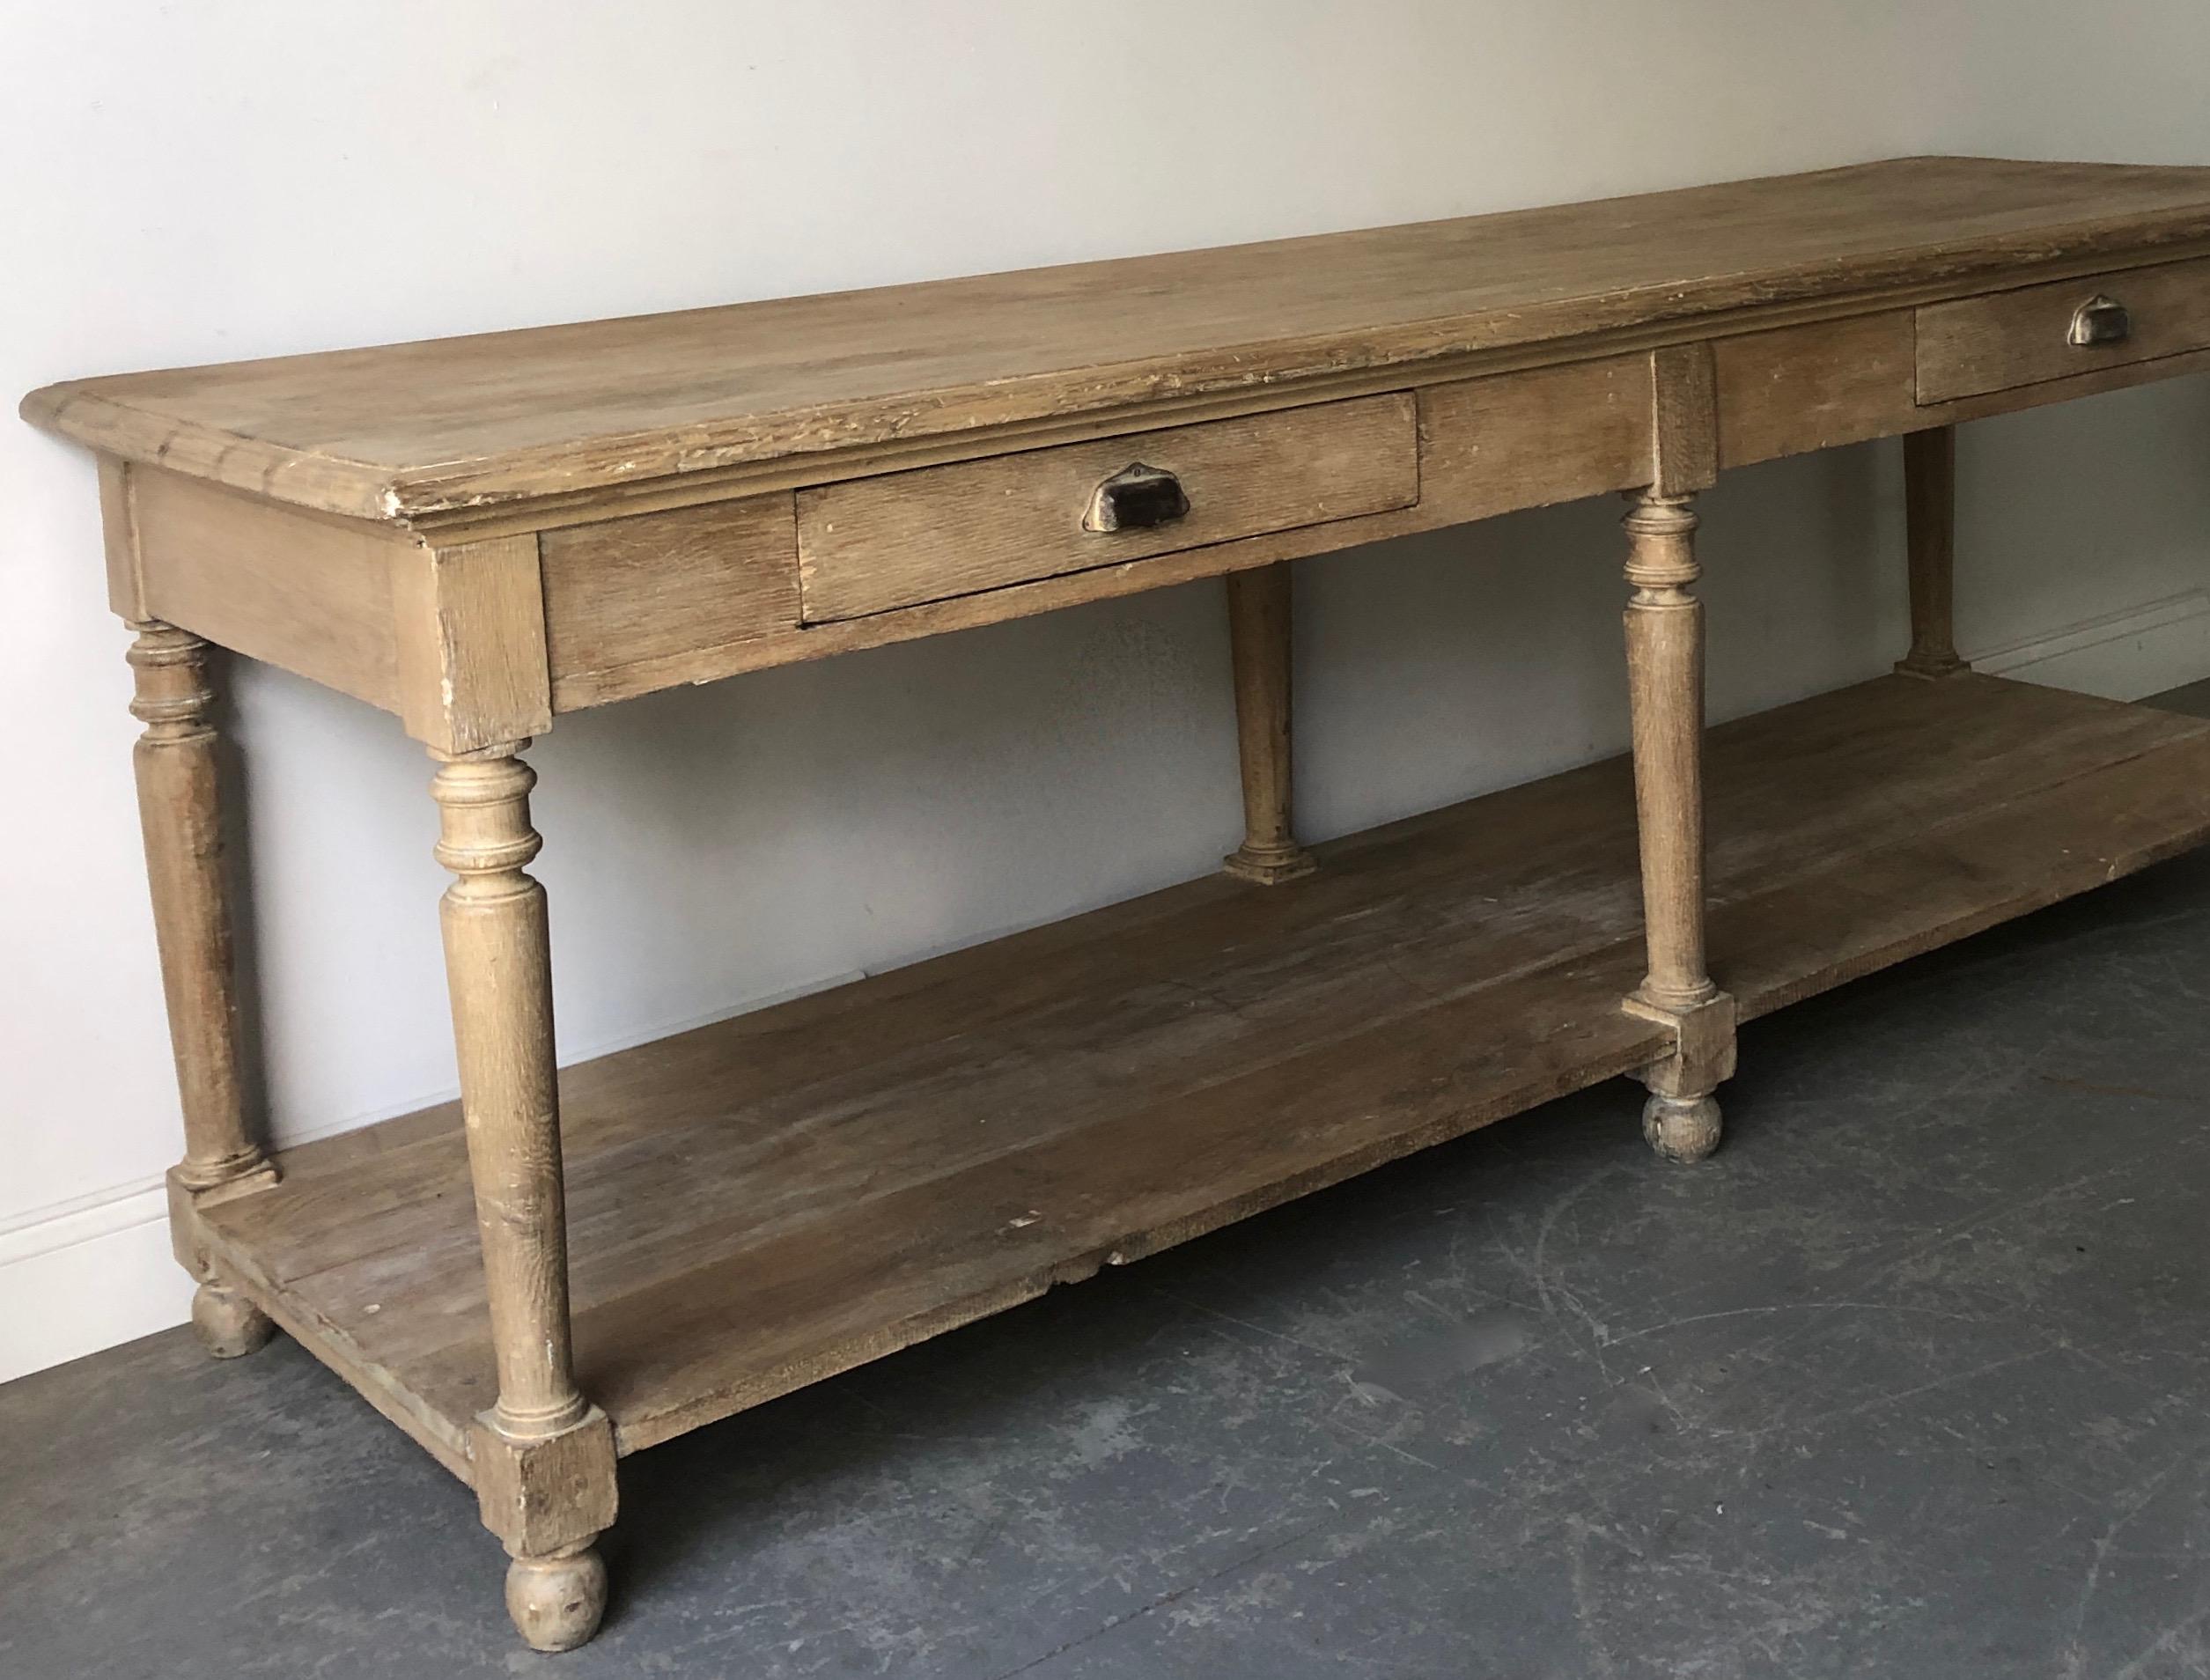 Large 19th century French drapery table with two large drawers, baluster columns und length of the table undertier shelf is a great place for storage -- supporting of six ball legs.
More than ever, we selected the best, the rarest, the unusual, the